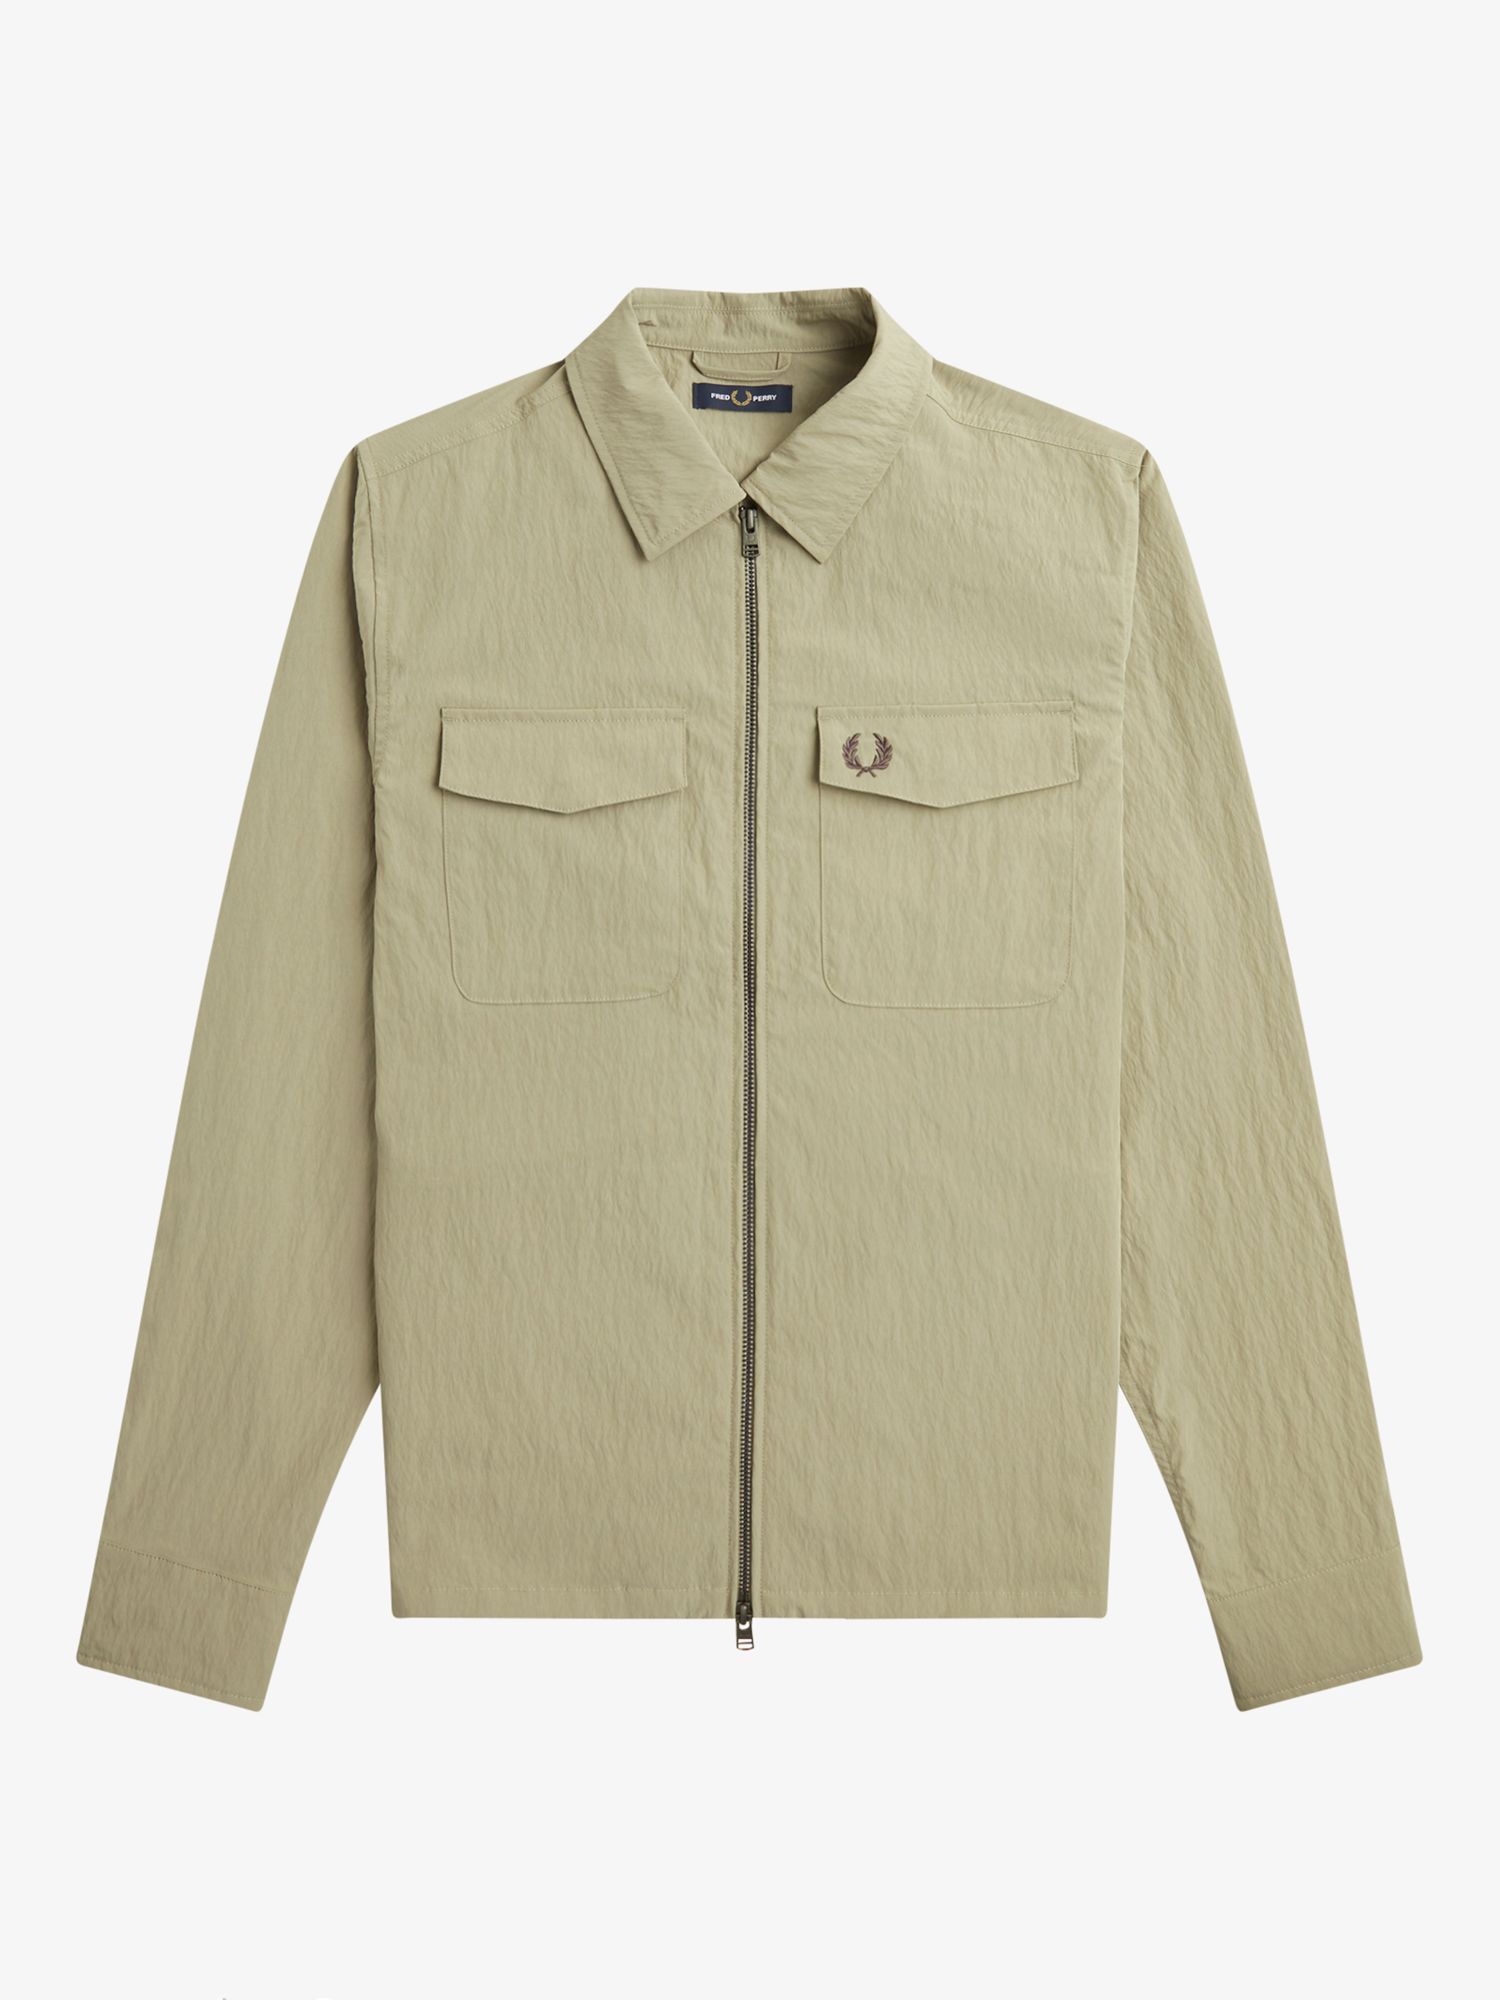 Buy Fred Perry Zip Overshirt, Warm Grey Online at johnlewis.com